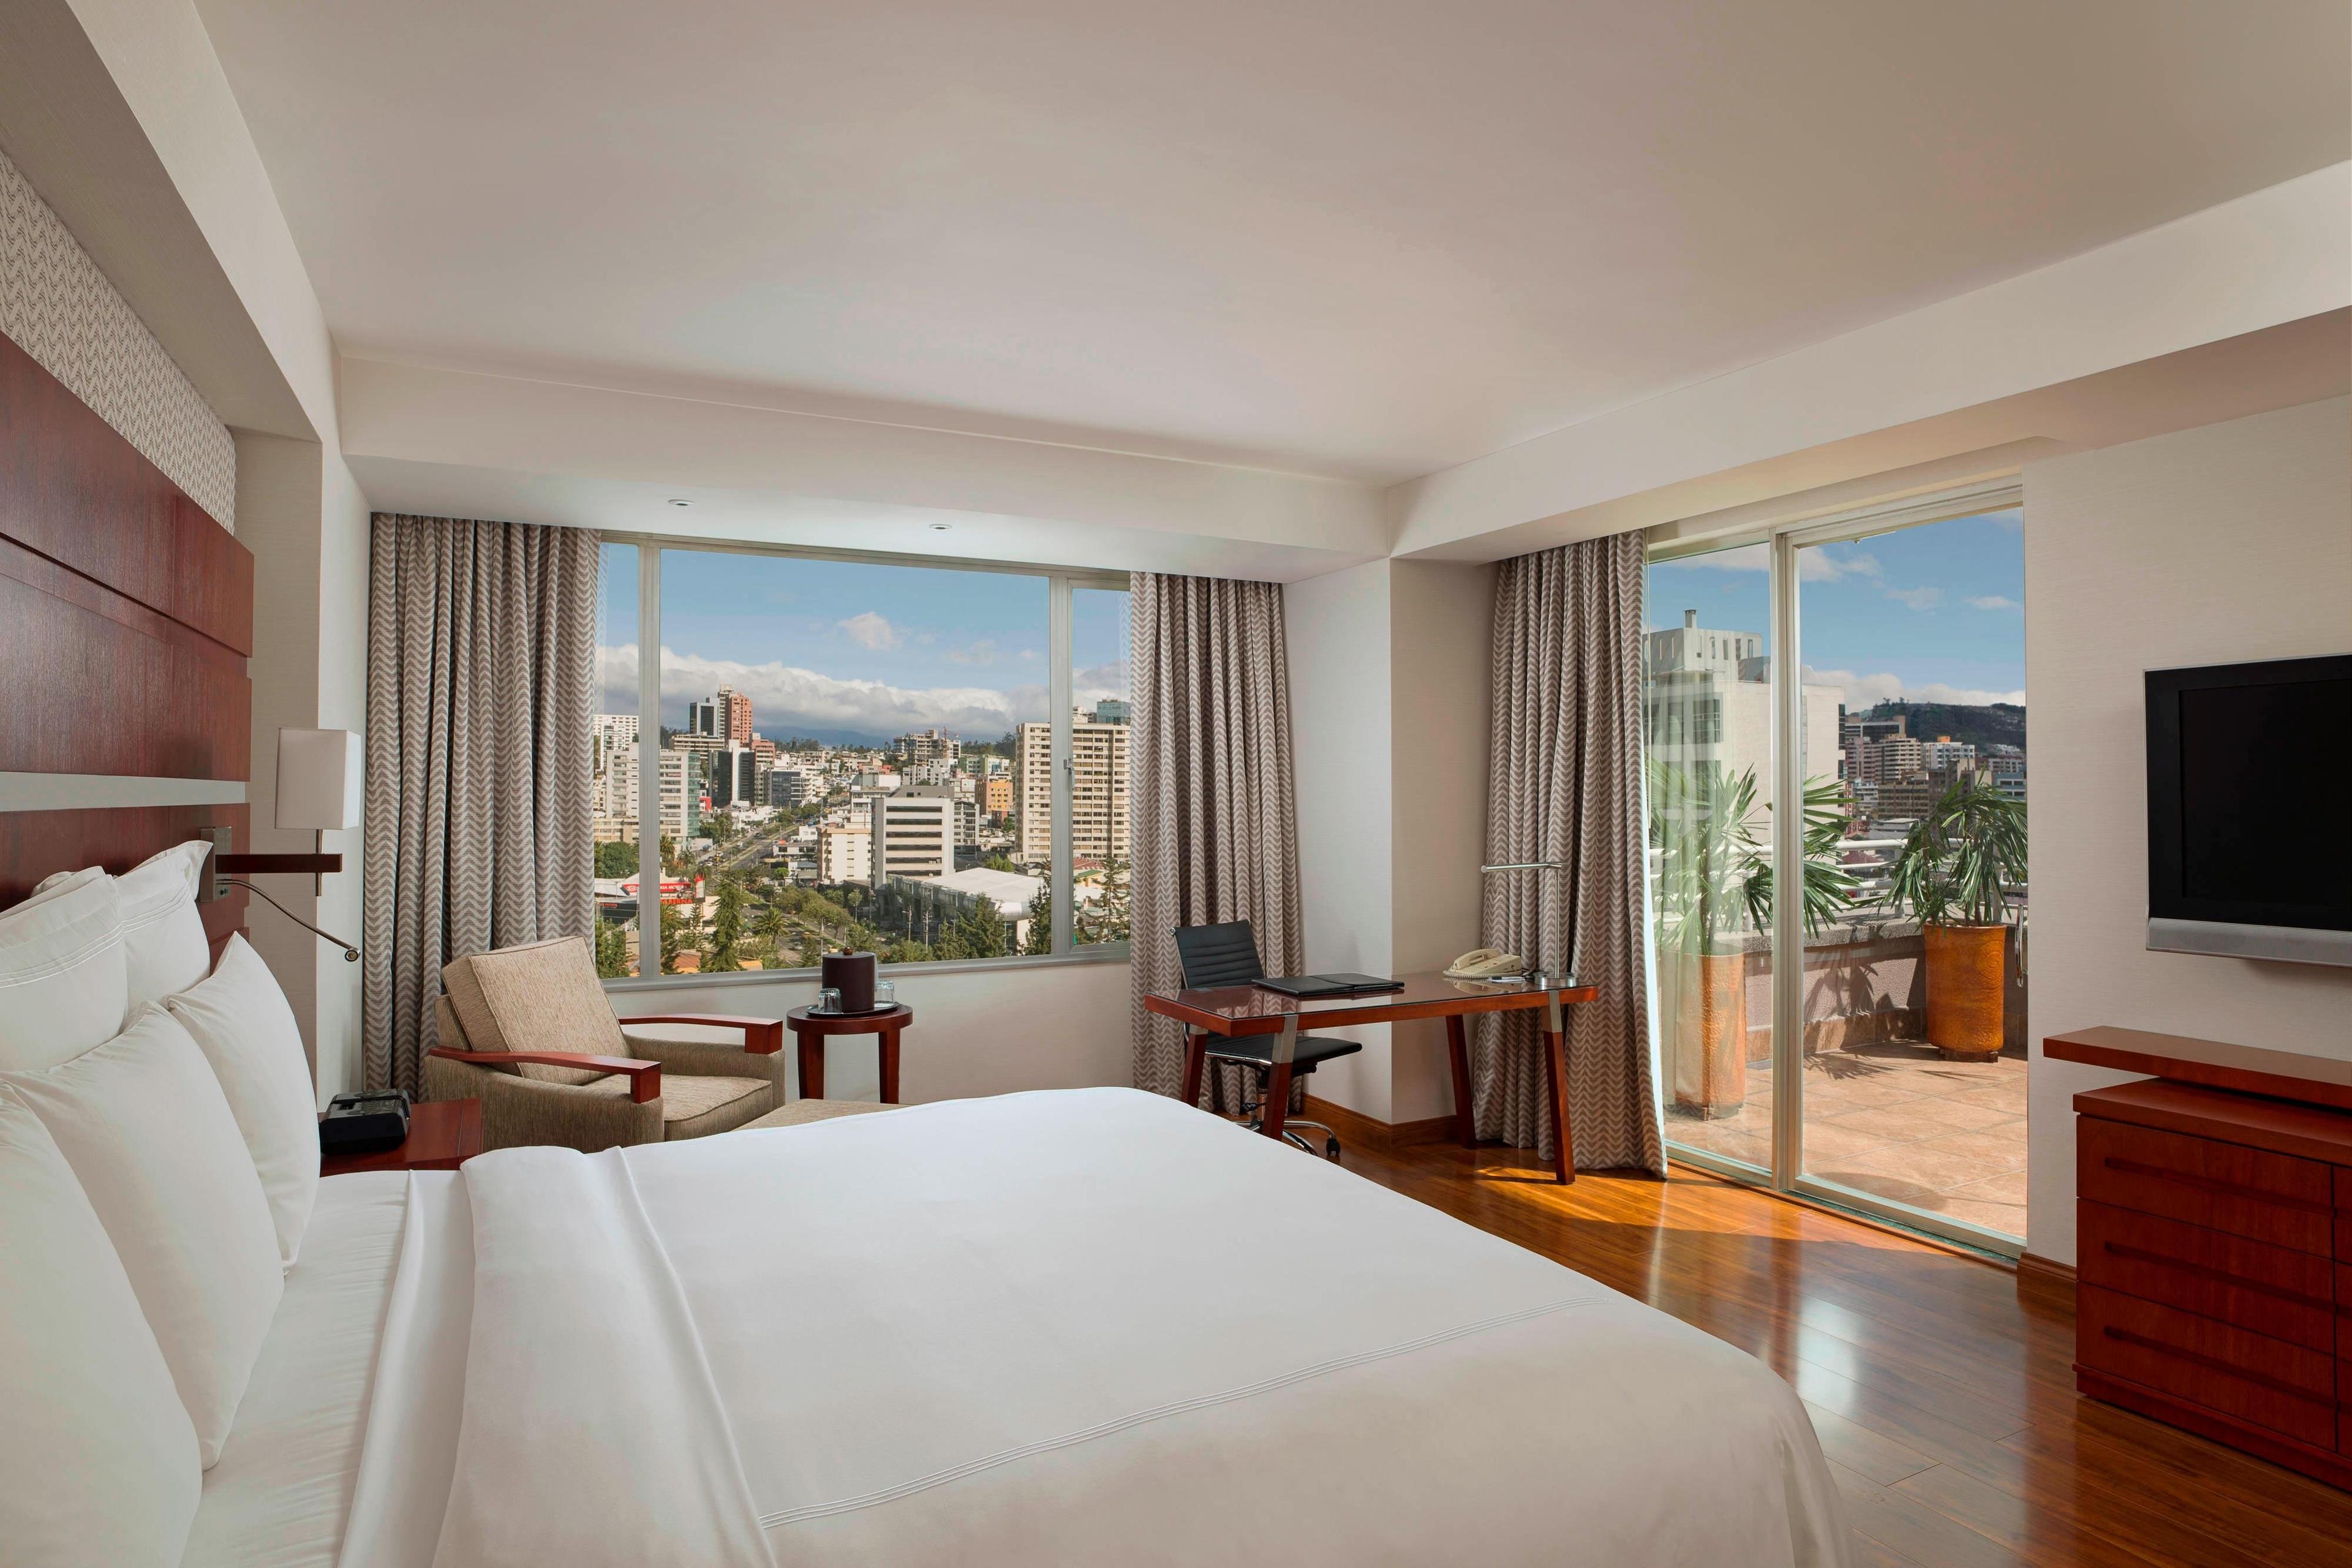 Take in captivating views of the Quito skyline when you step out onto our outdoor terraces. When hunger arises, order a meal with our 24-hour room service.